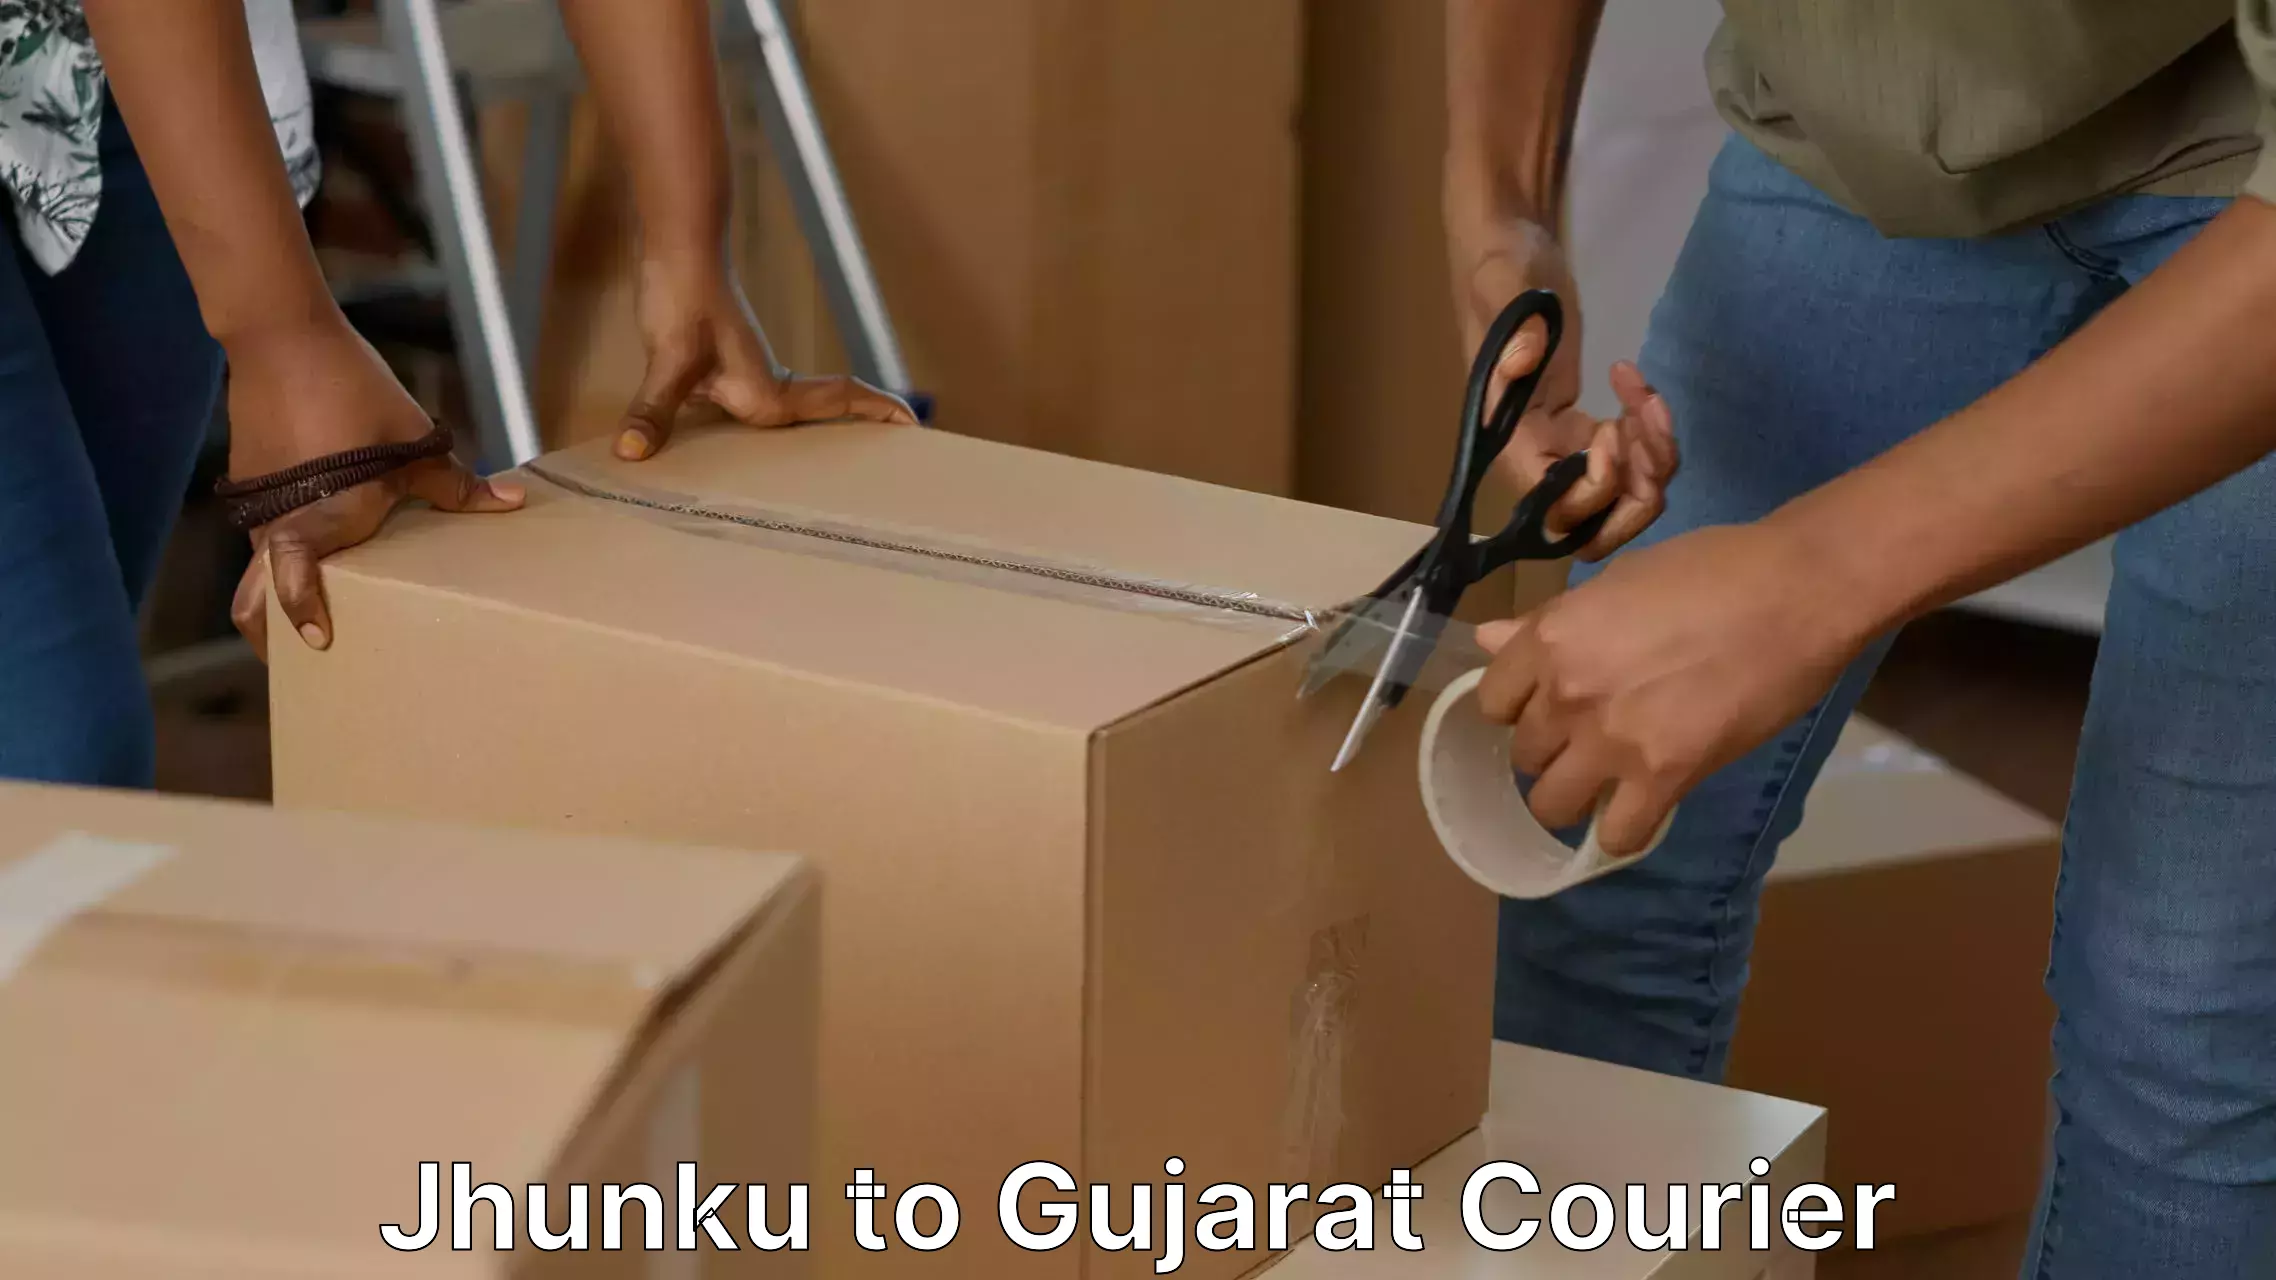 Residential moving experts Jhunku to Halvad